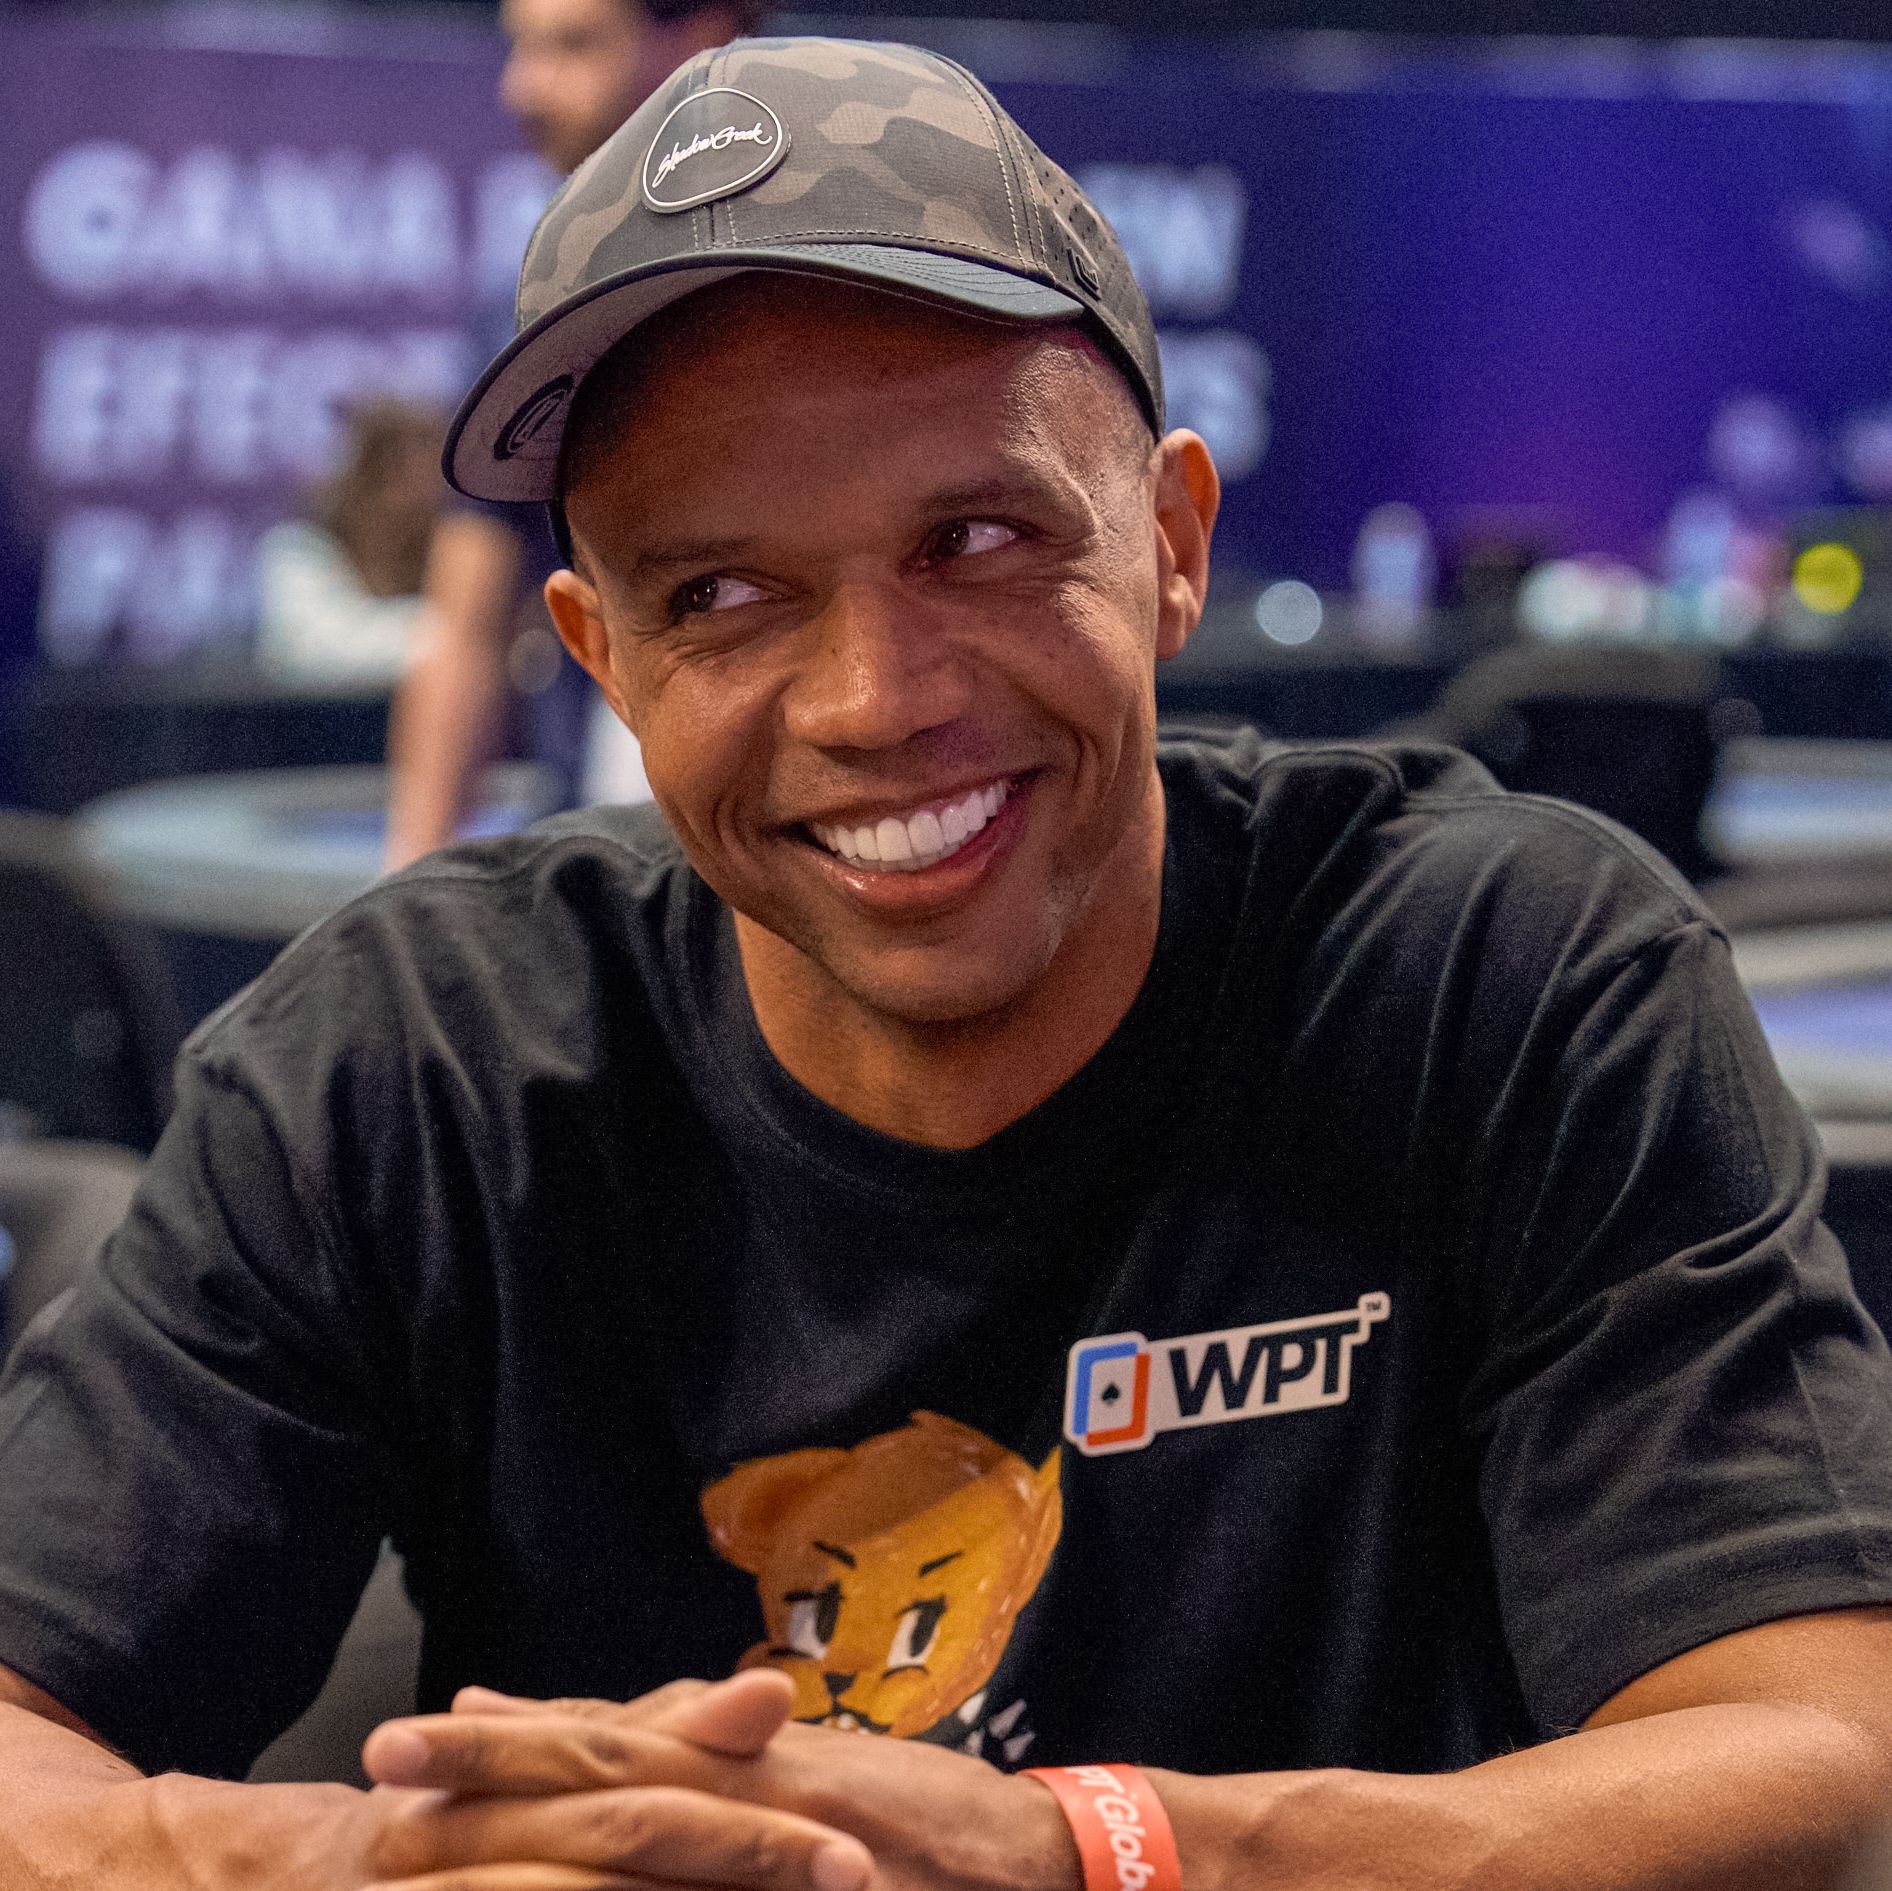 Phil Ivey Interview: World Poker Tour, Sobriety, Life, More